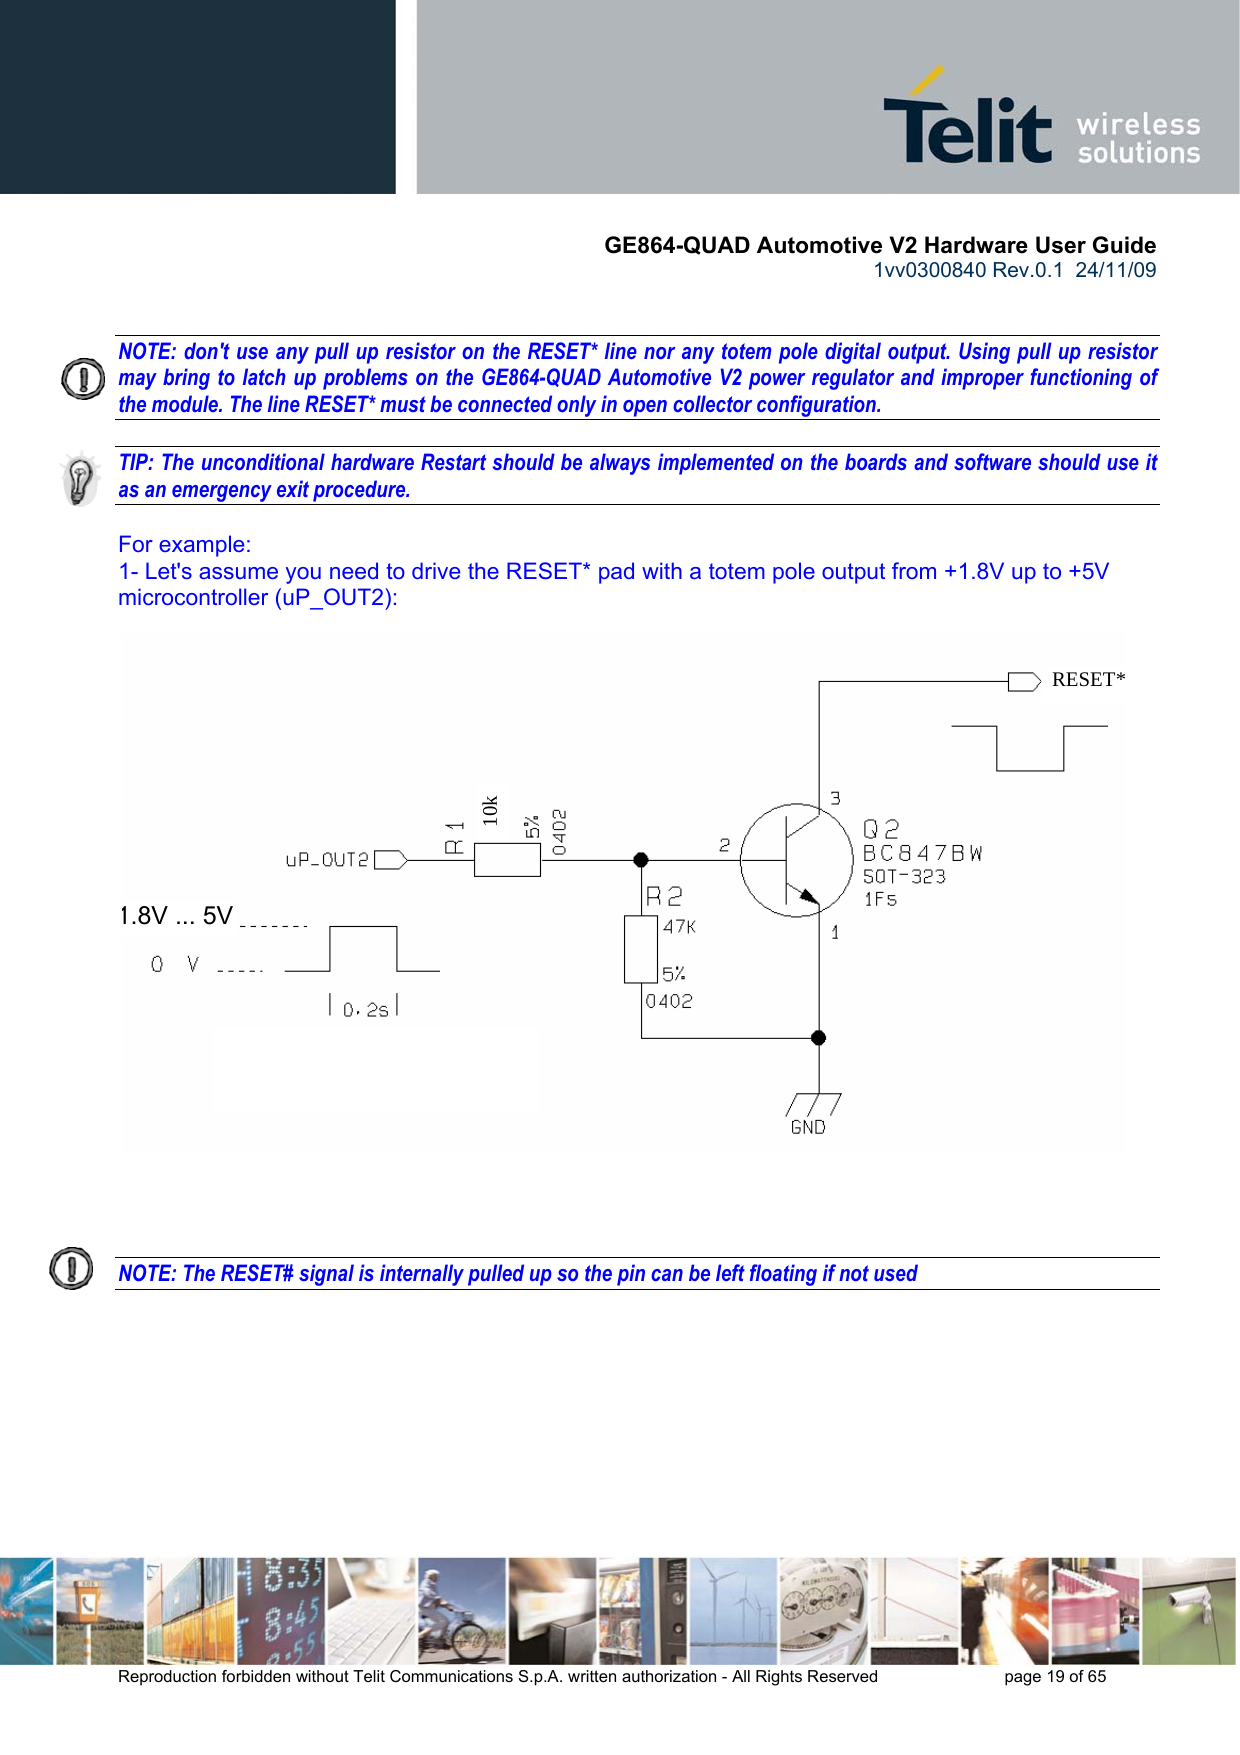       GE864-QUAD Automotive V2 Hardware User Guide 1vv0300840 Rev.0.1  24/11/09      Reproduction forbidden without Telit Communications S.p.A. written authorization - All Rights Reserved    page 19 of 65    NOTE: don&apos;t use any pull up resistor on the RESET* line nor any totem pole digital output. Using pull up resistor may bring to latch up problems on the GE864-QUAD Automotive V2 power regulator and improper functioning of the module. The line RESET* must be connected only in open collector configuration.  TIP: The unconditional hardware Restart should be always implemented on the boards and software should use it as an emergency exit procedure.  For example: 1- Let&apos;s assume you need to drive the RESET* pad with a totem pole output from +1.8V up to +5V microcontroller (uP_OUT2):     NOTE: The RESET# signal is internally pulled up so the pin can be left floating if not used    10k   RESET*1.8V ... 5V 